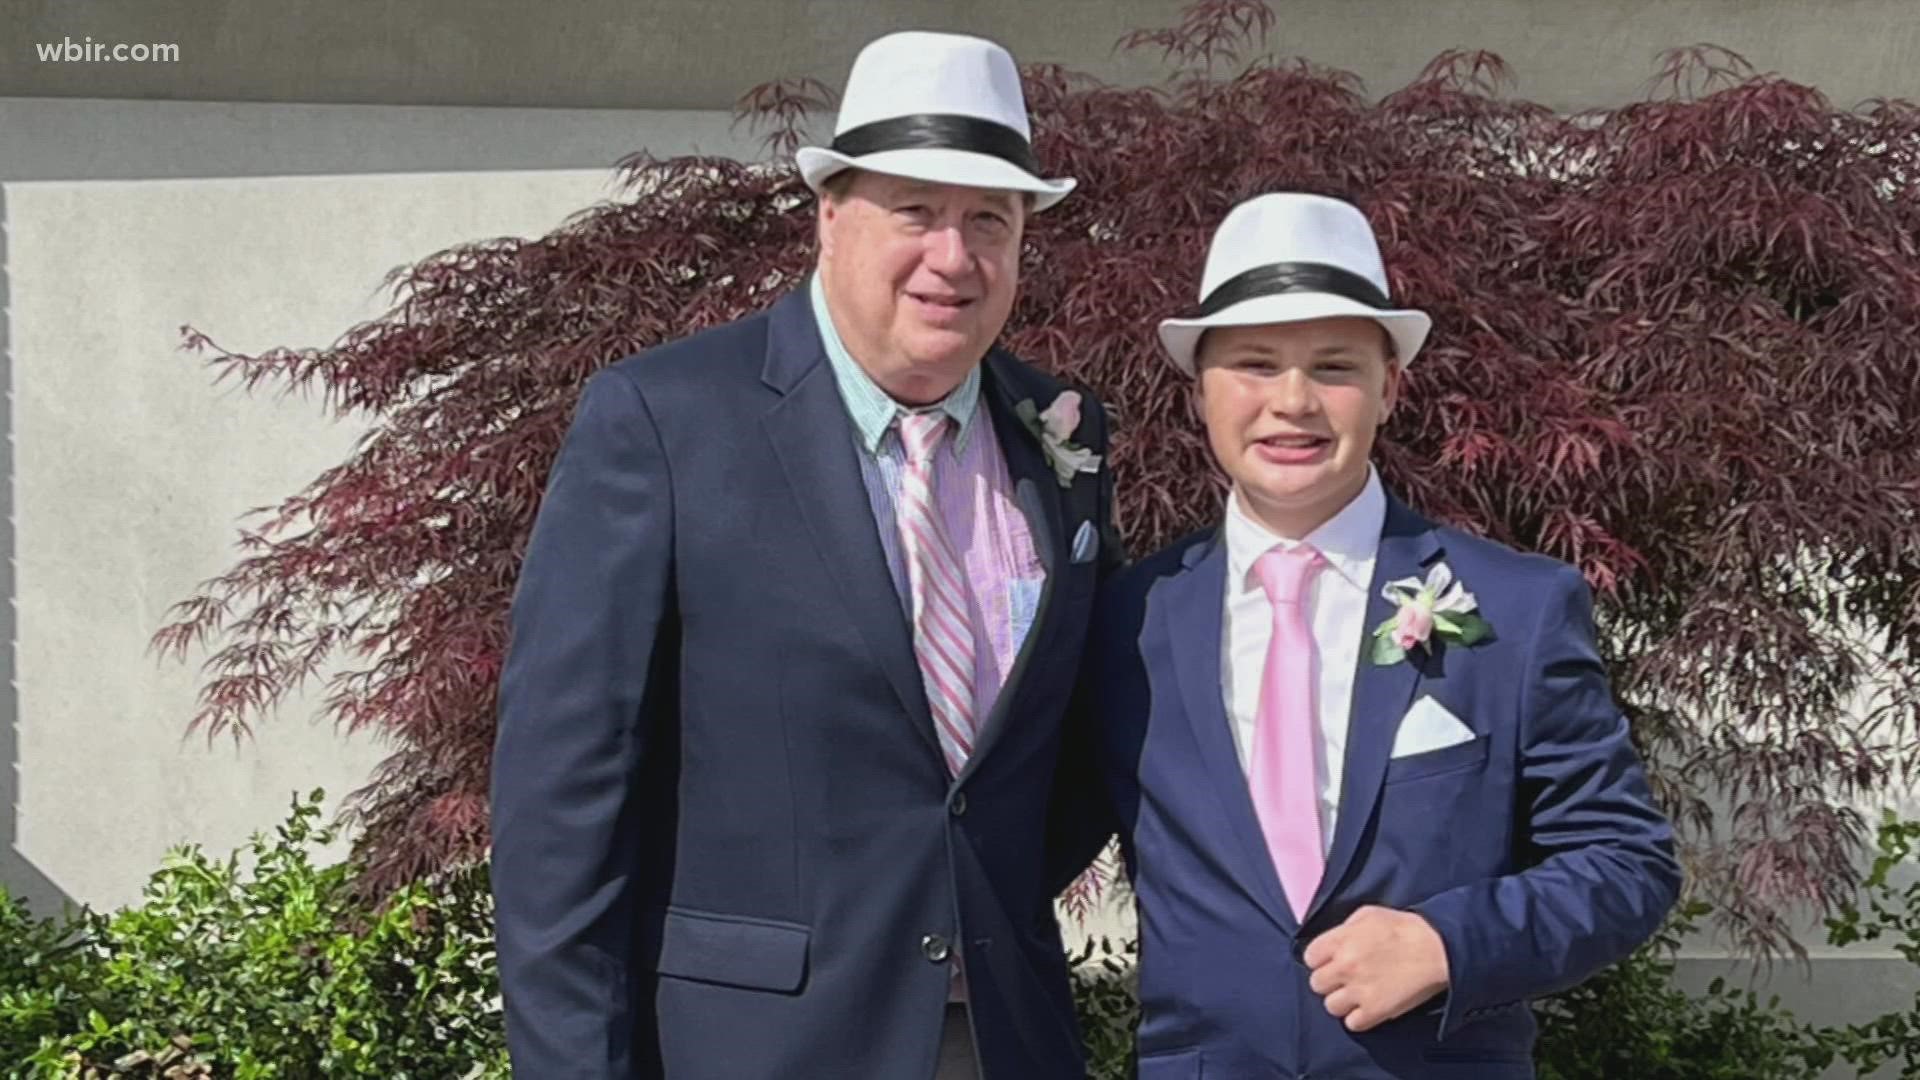 AJ Cucksey grew up watching horse races alongside his grandfather, Doug Moreland. The duo attended the Kentucky Derby and picked Rich Strike to win.